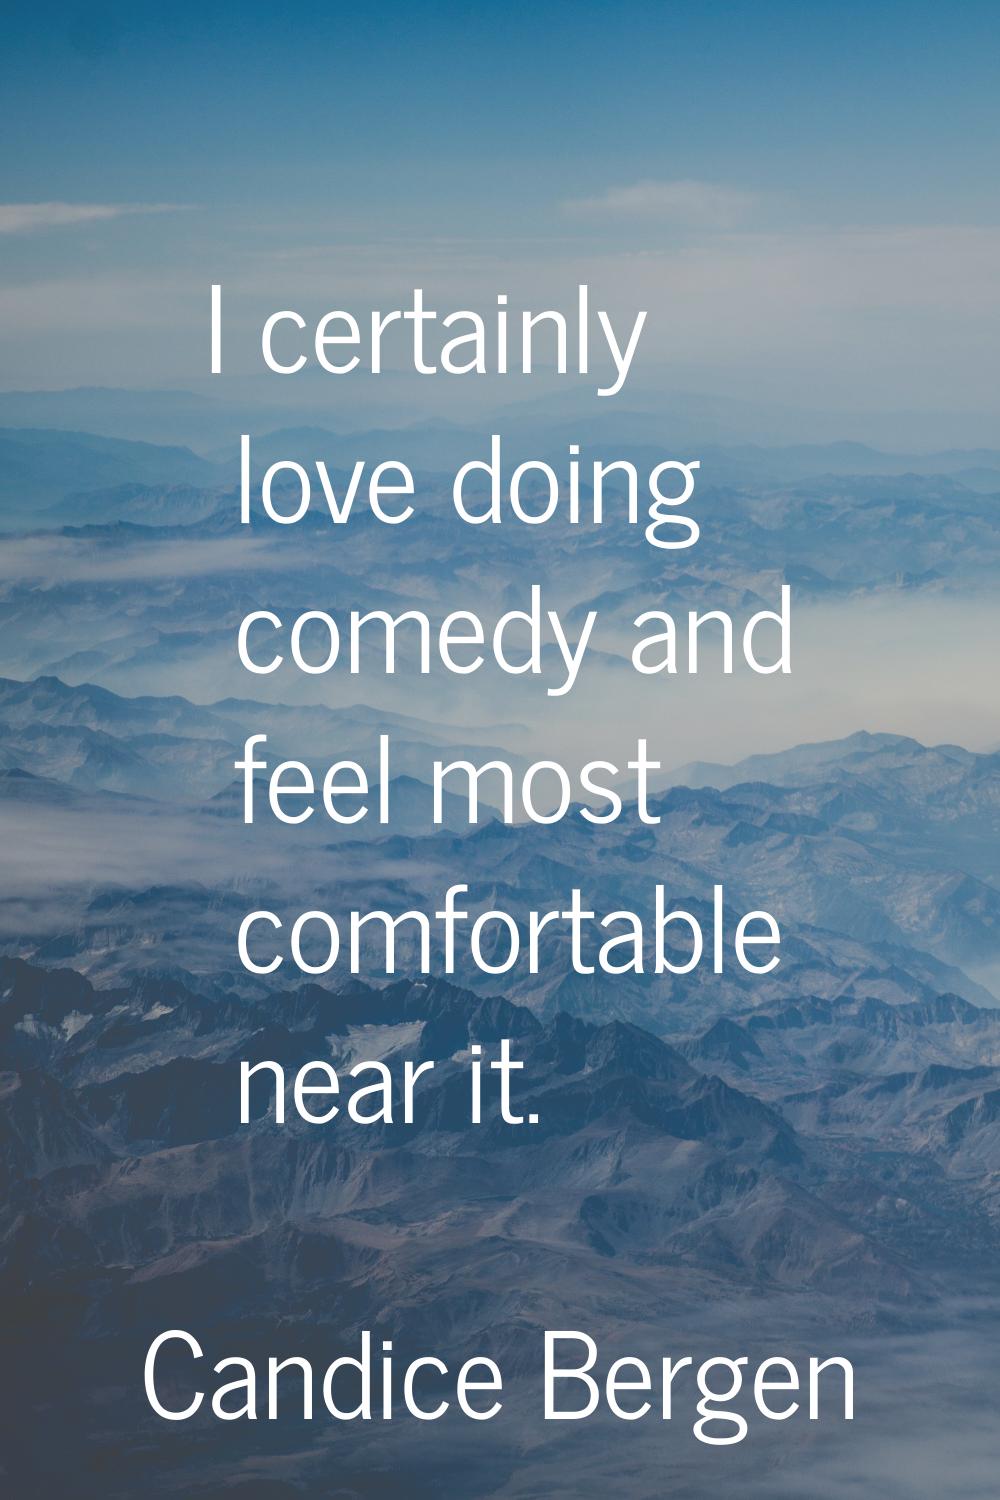 I certainly love doing comedy and feel most comfortable near it.